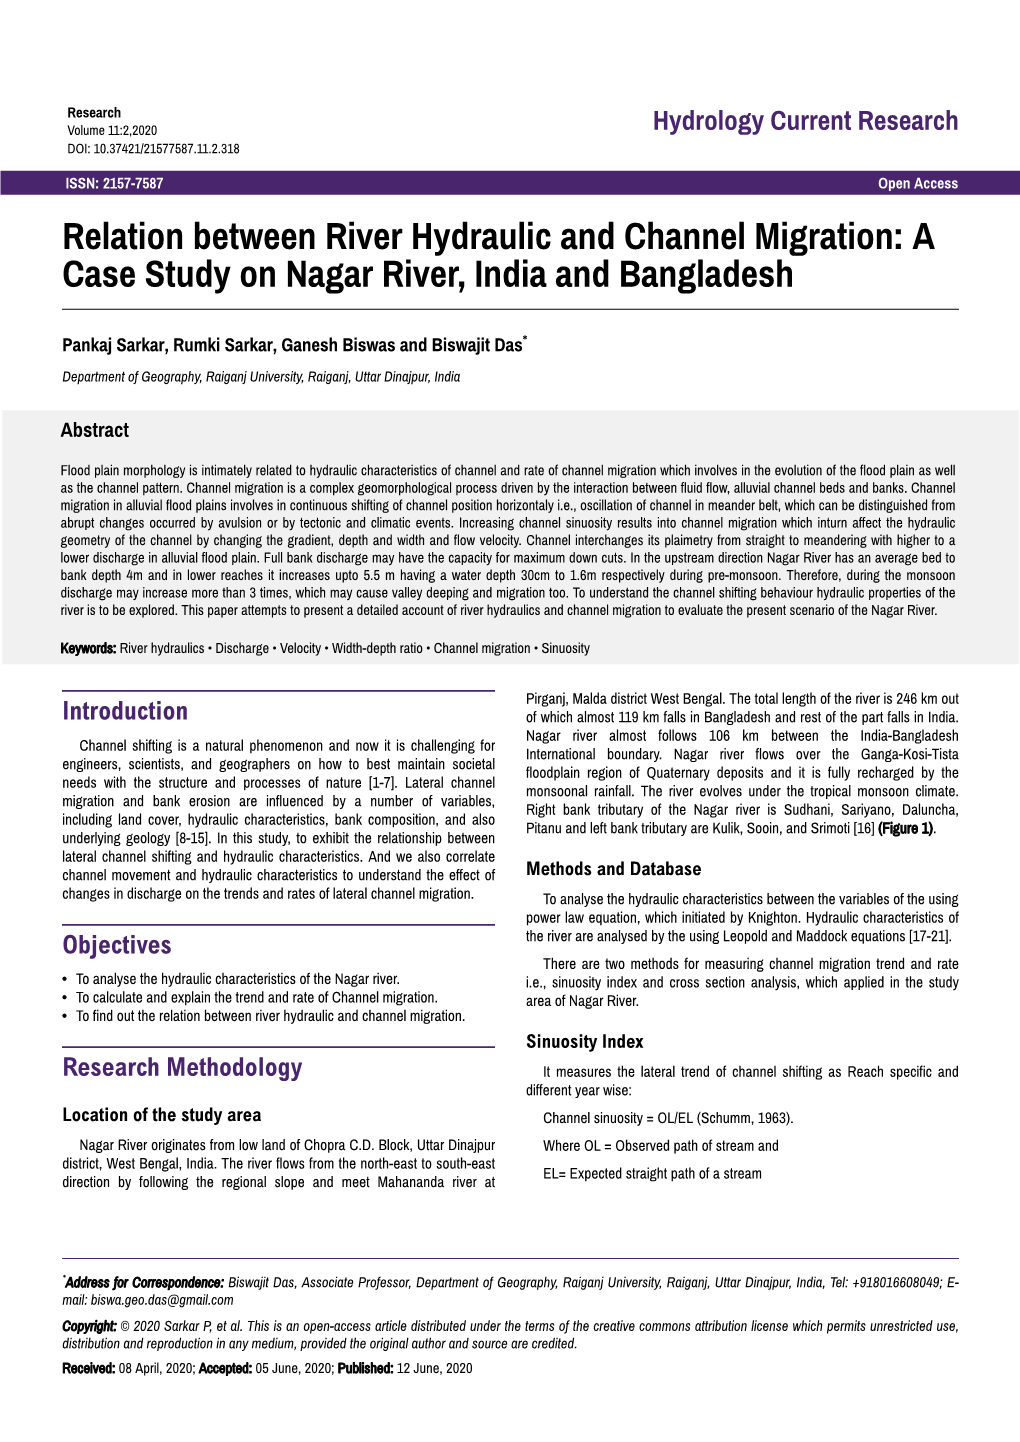 Relation Between River Hydraulic and Channel Migration: a Case Study on Nagar River, India and Bangladesh